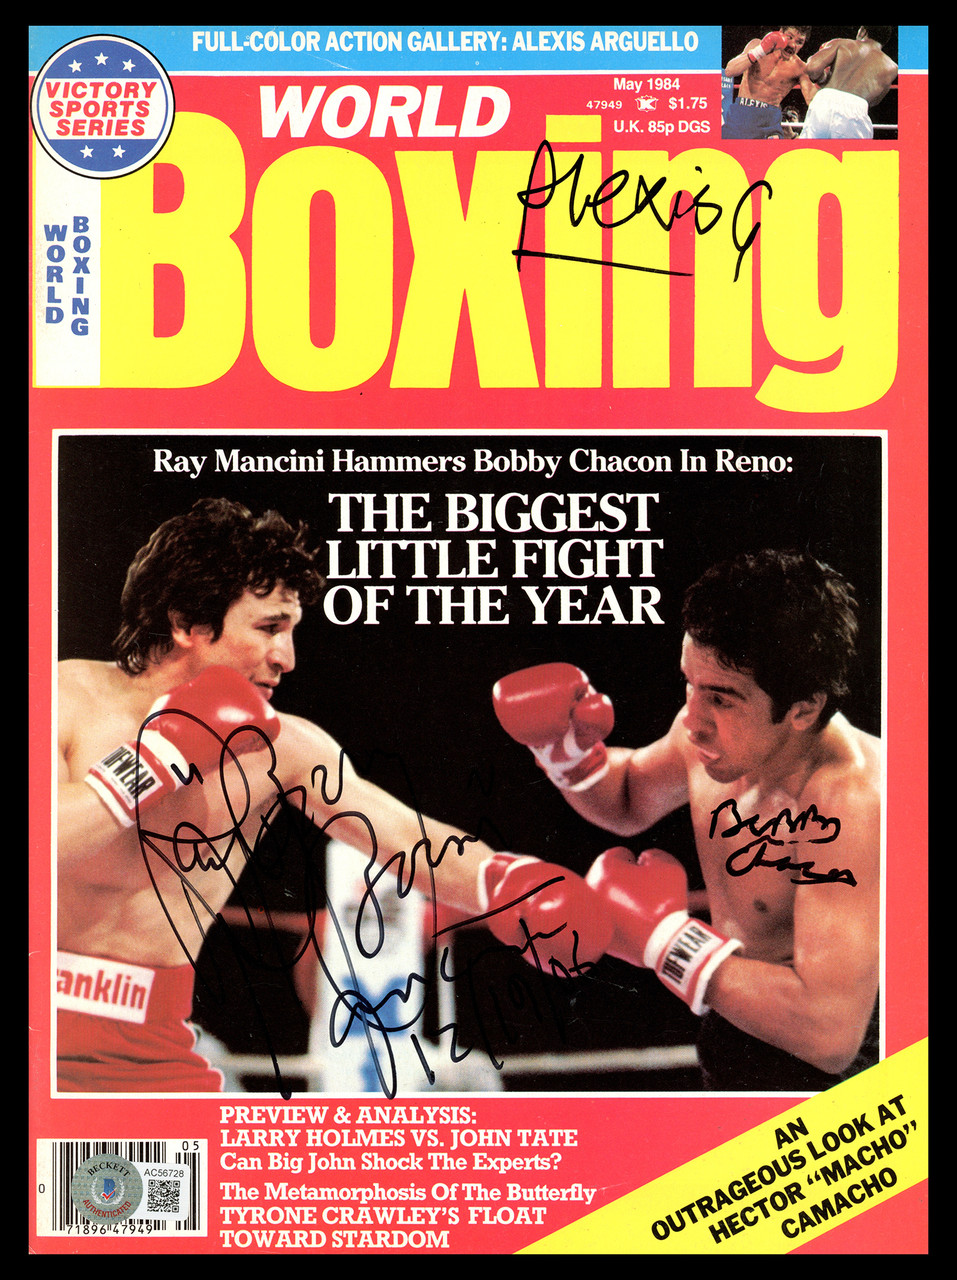 Ray Boom Boom Mancini - Autographed Inscribed Photograph